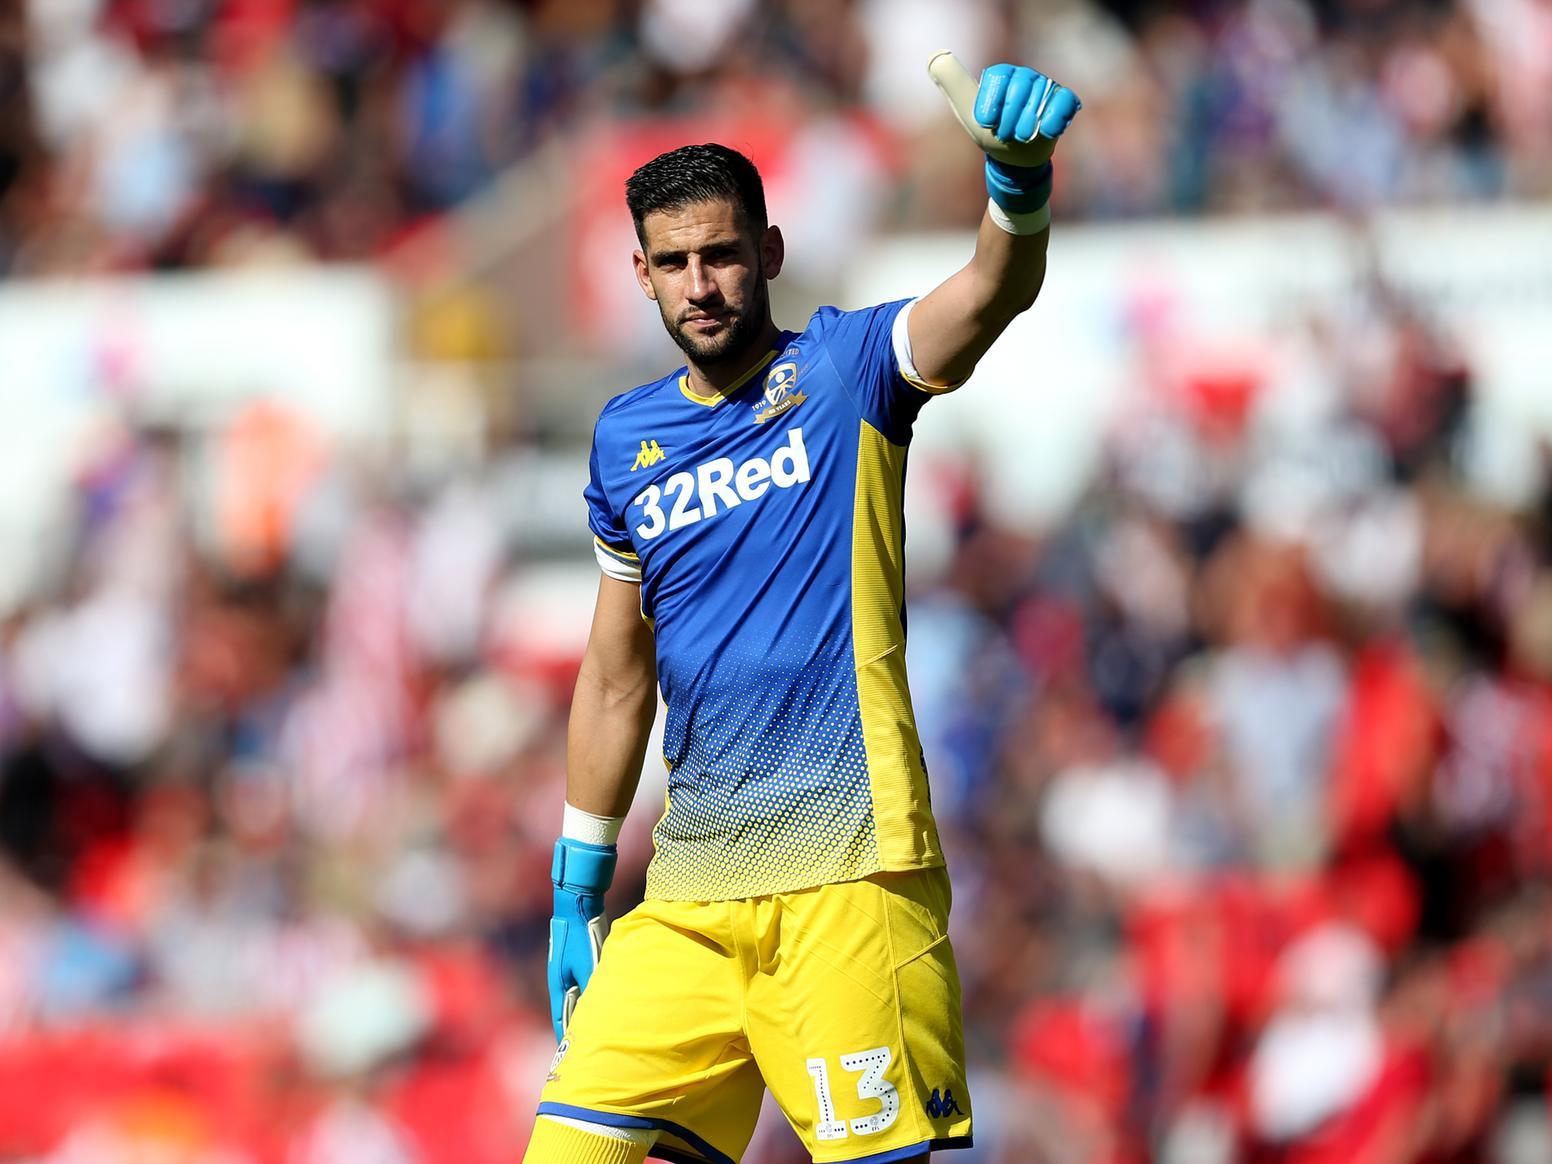 8 - The save he pulled off from Eaves in the second half was a game-changer, allowing Leeds to stay 1-0 up and break, before making it 2-0. A keeper in fine form.